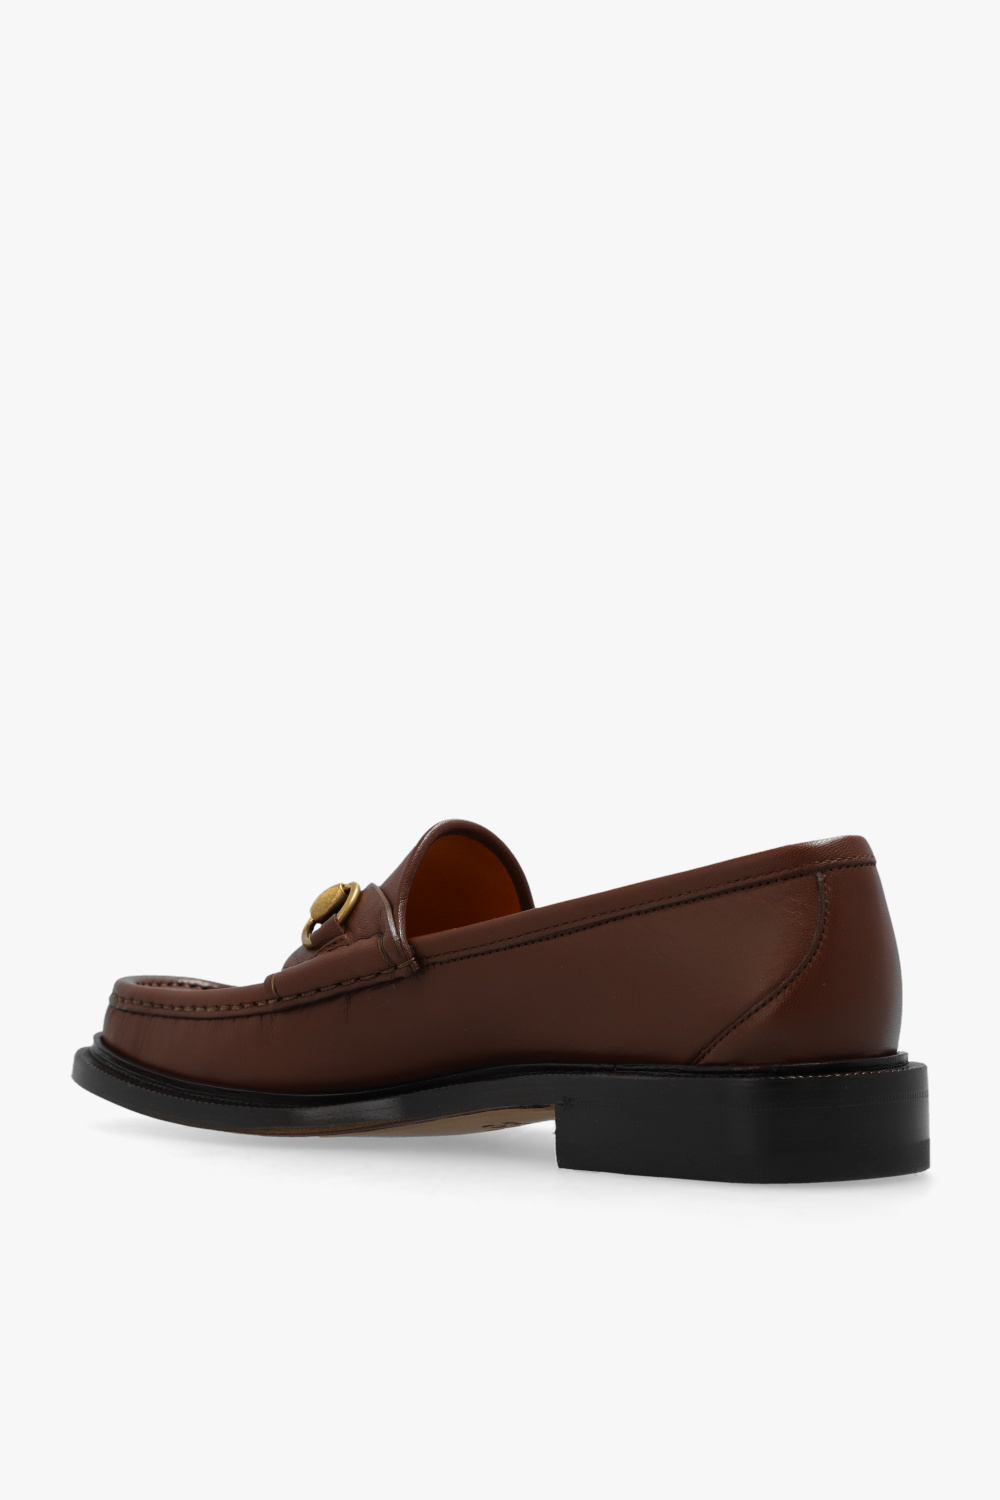 gucci Chain Leather loafers